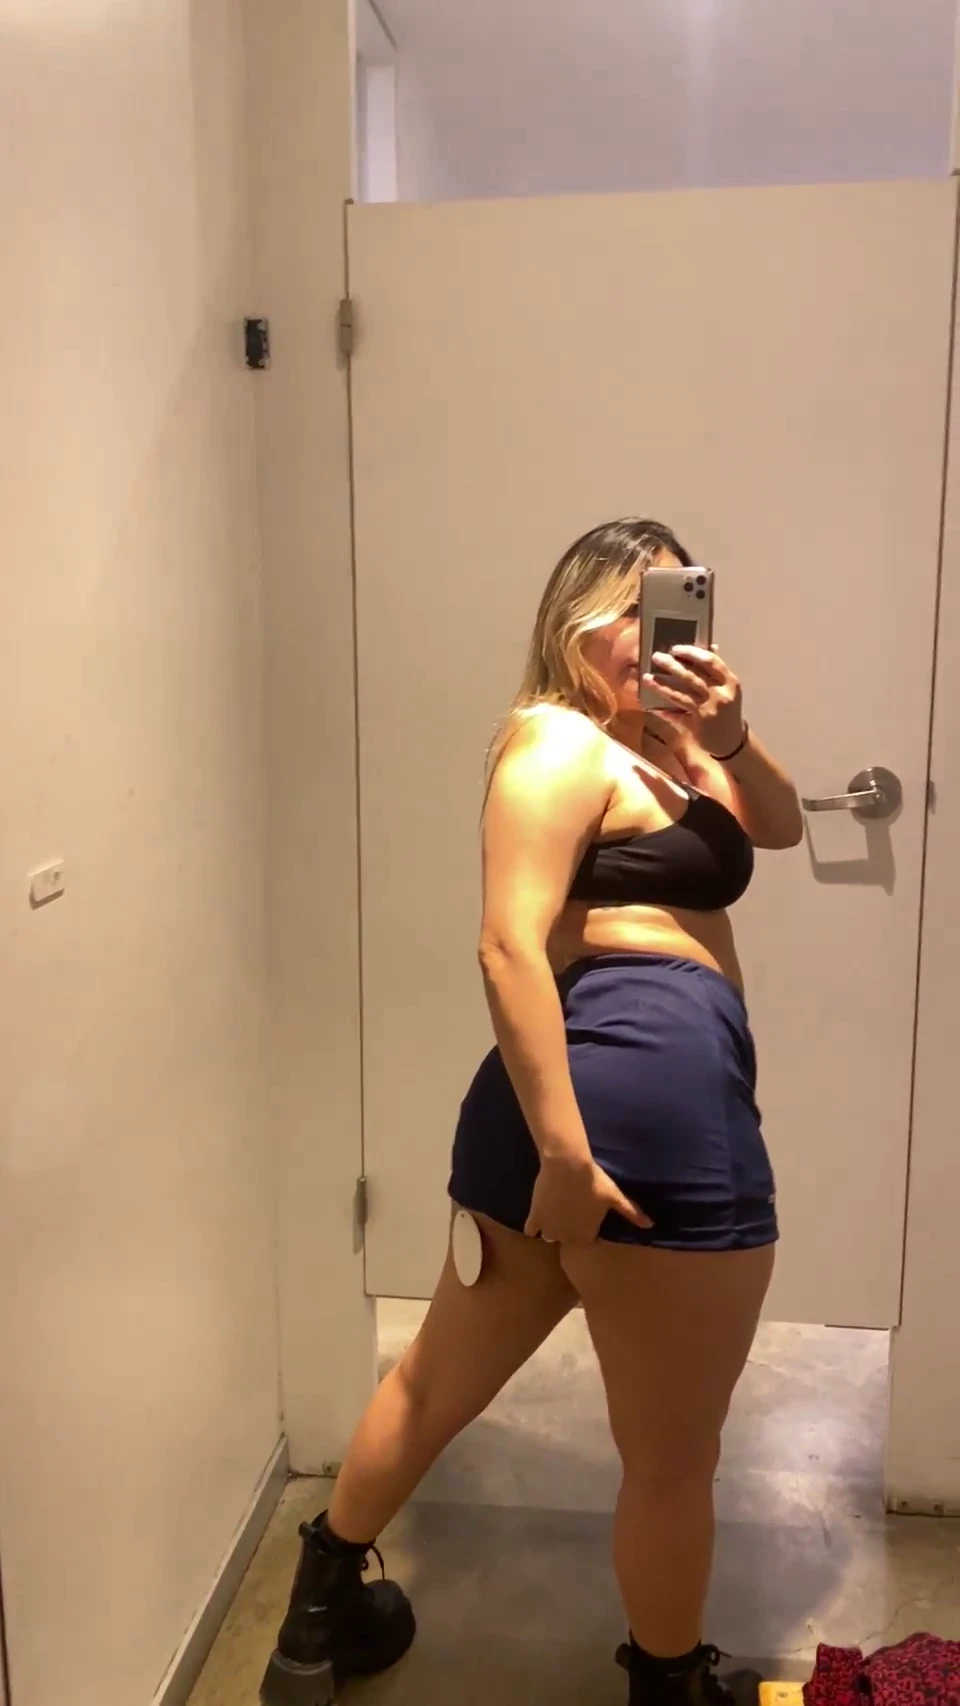 skirt on a ChangingRooms